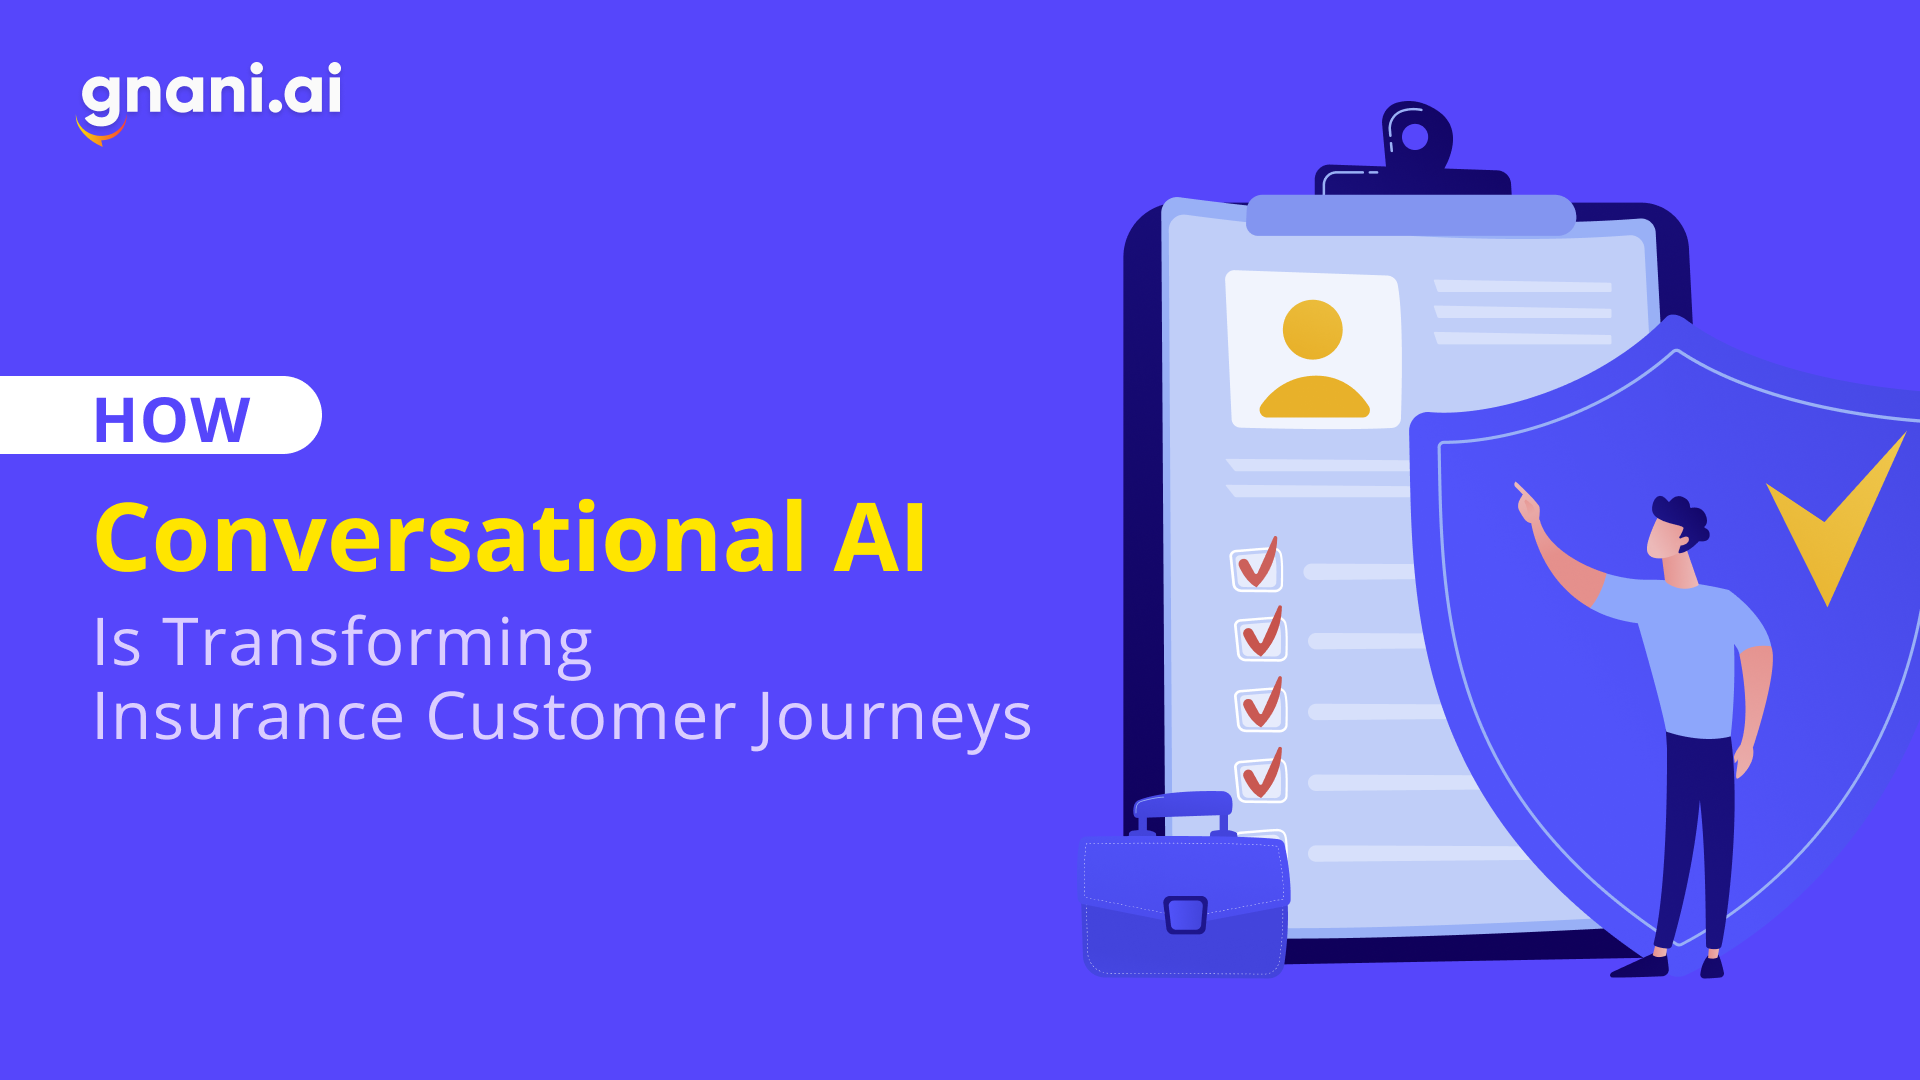 conversational AI in insurance customer journey featured image